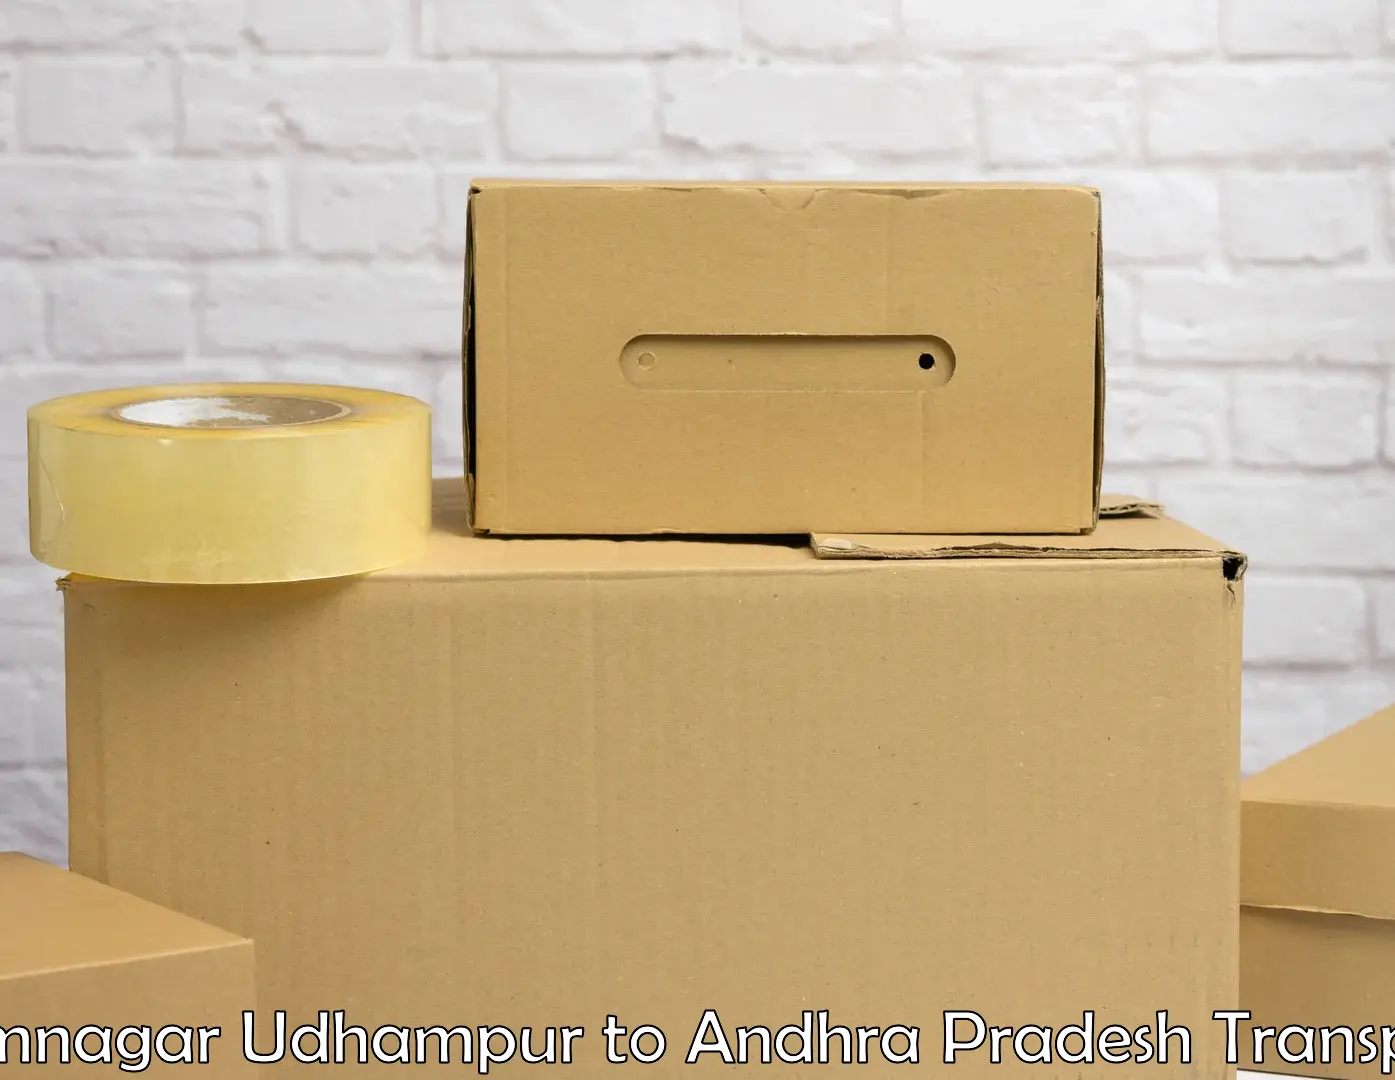 Package delivery services in Ramnagar Udhampur to Chodavaram